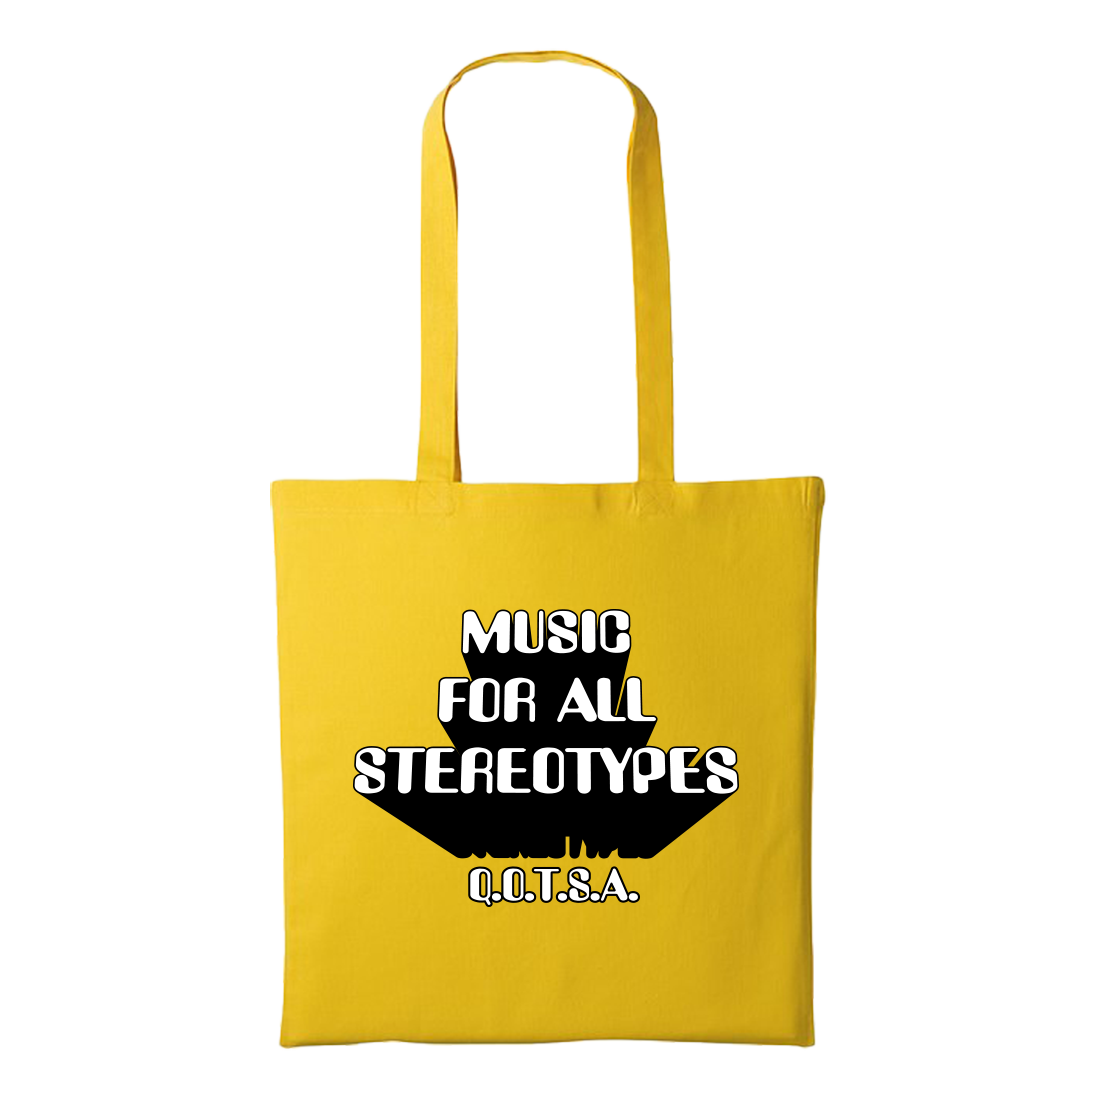 Queens Of The Stone Age - Music for All Stereotypes Tote